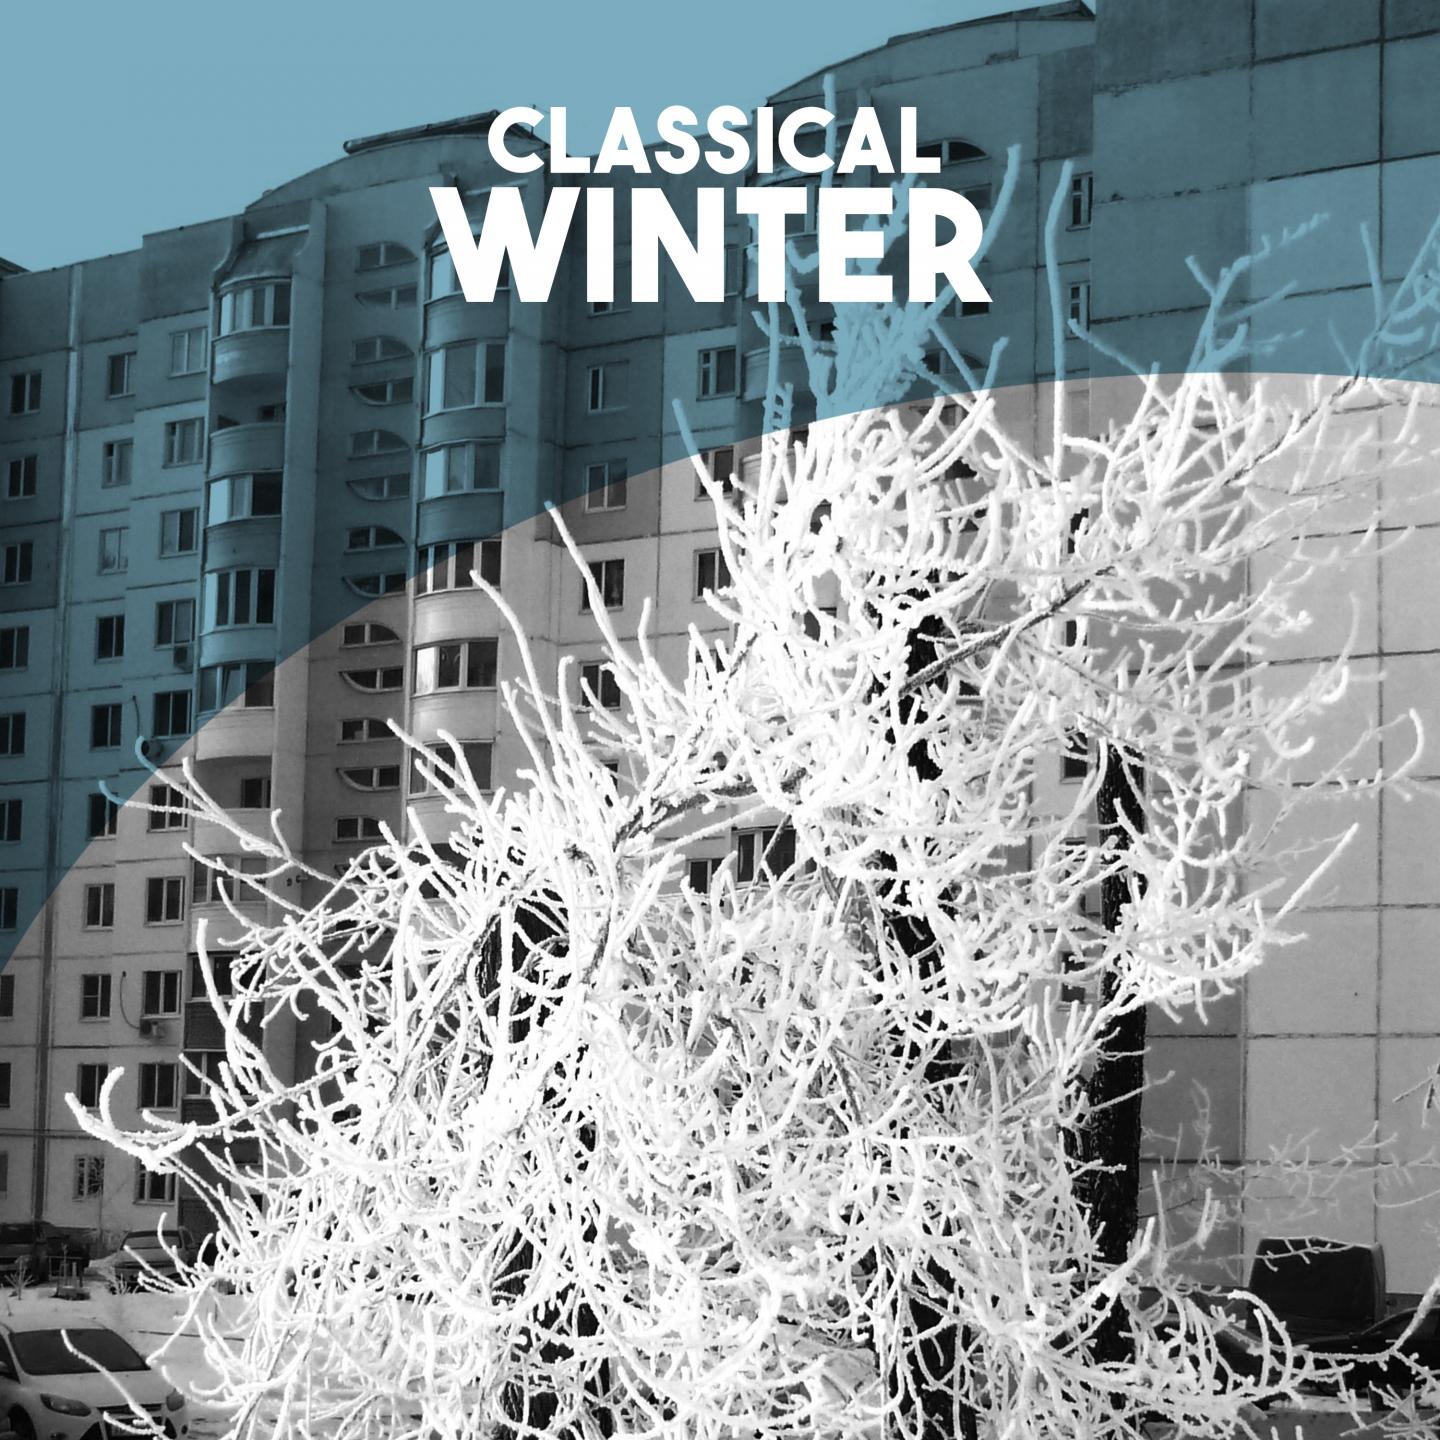 Symphony No. 1 in G Minor, Op. 13, Th 24, w 21: I. Daydreams on a Winter Journey  Allegro Tranquillo